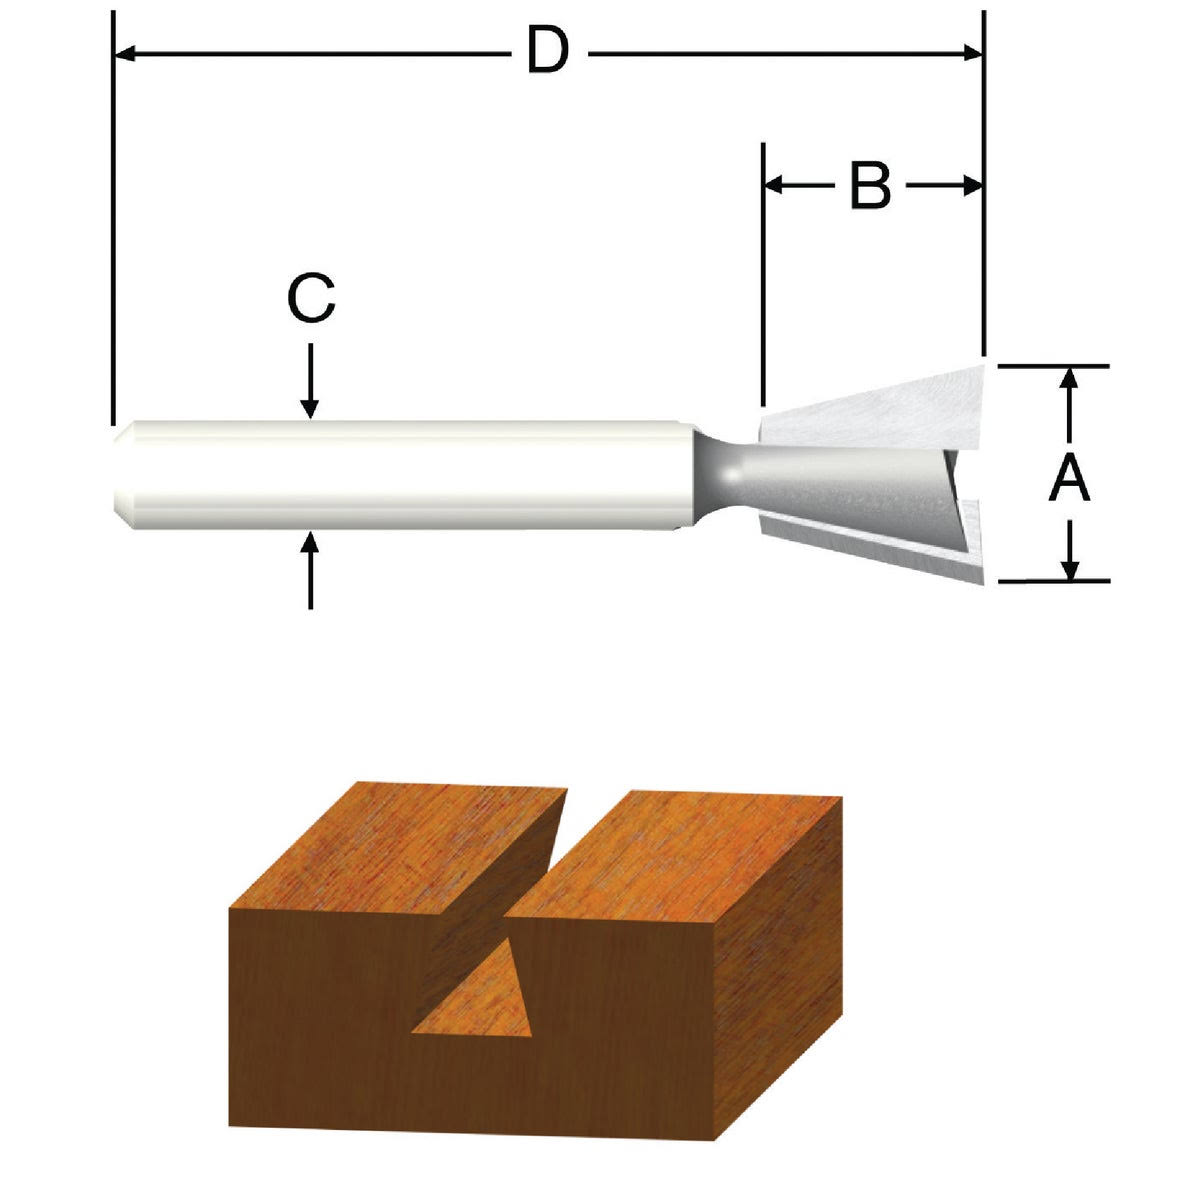 Vermont American Dovetail Router Bit - 3/8"